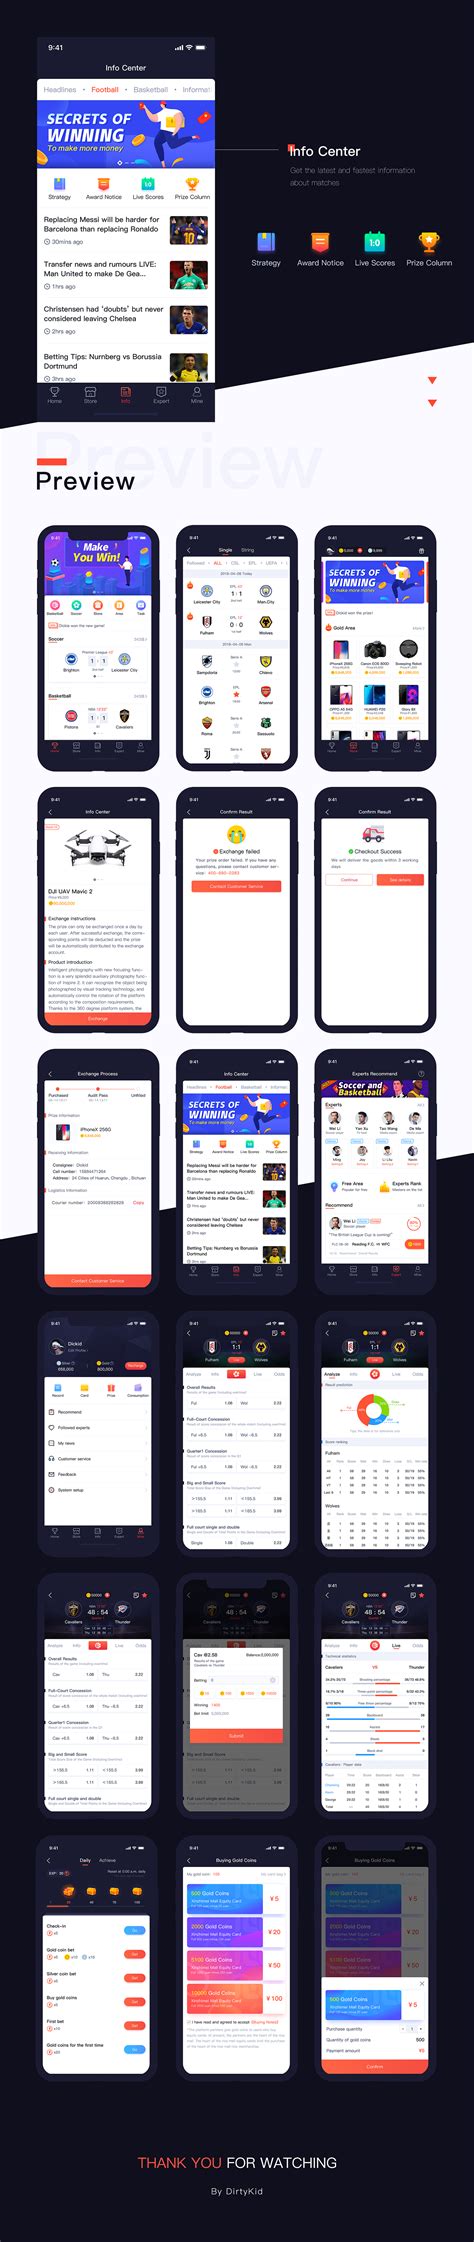 I know there are horror stores with off shore apps but with regular sports betting i have not have an issue and will be using again when in. Sports Betting App on Behance